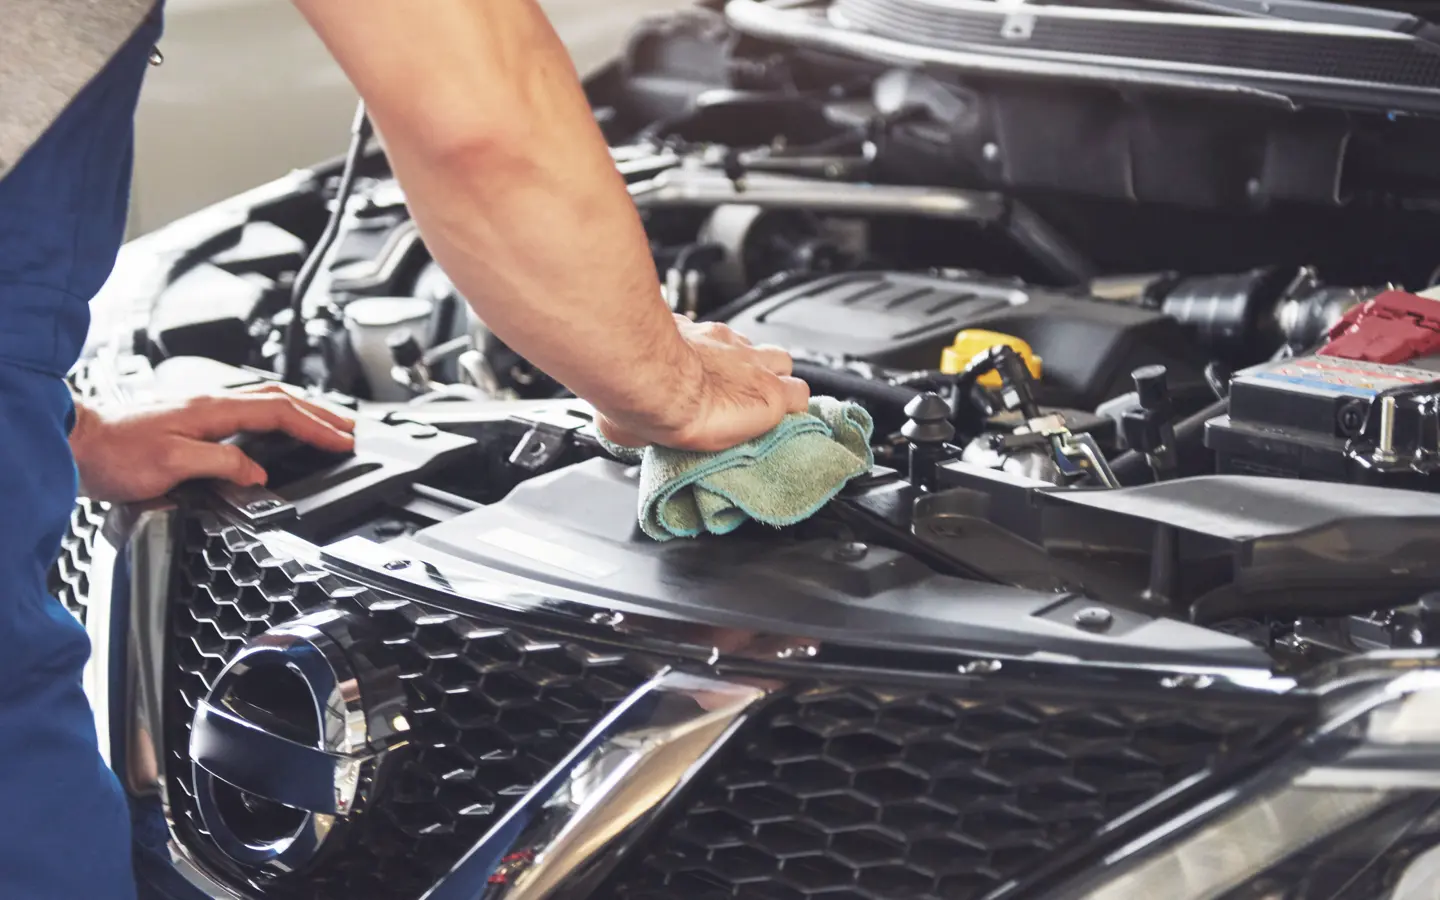 Can I tax my car without an MOT?